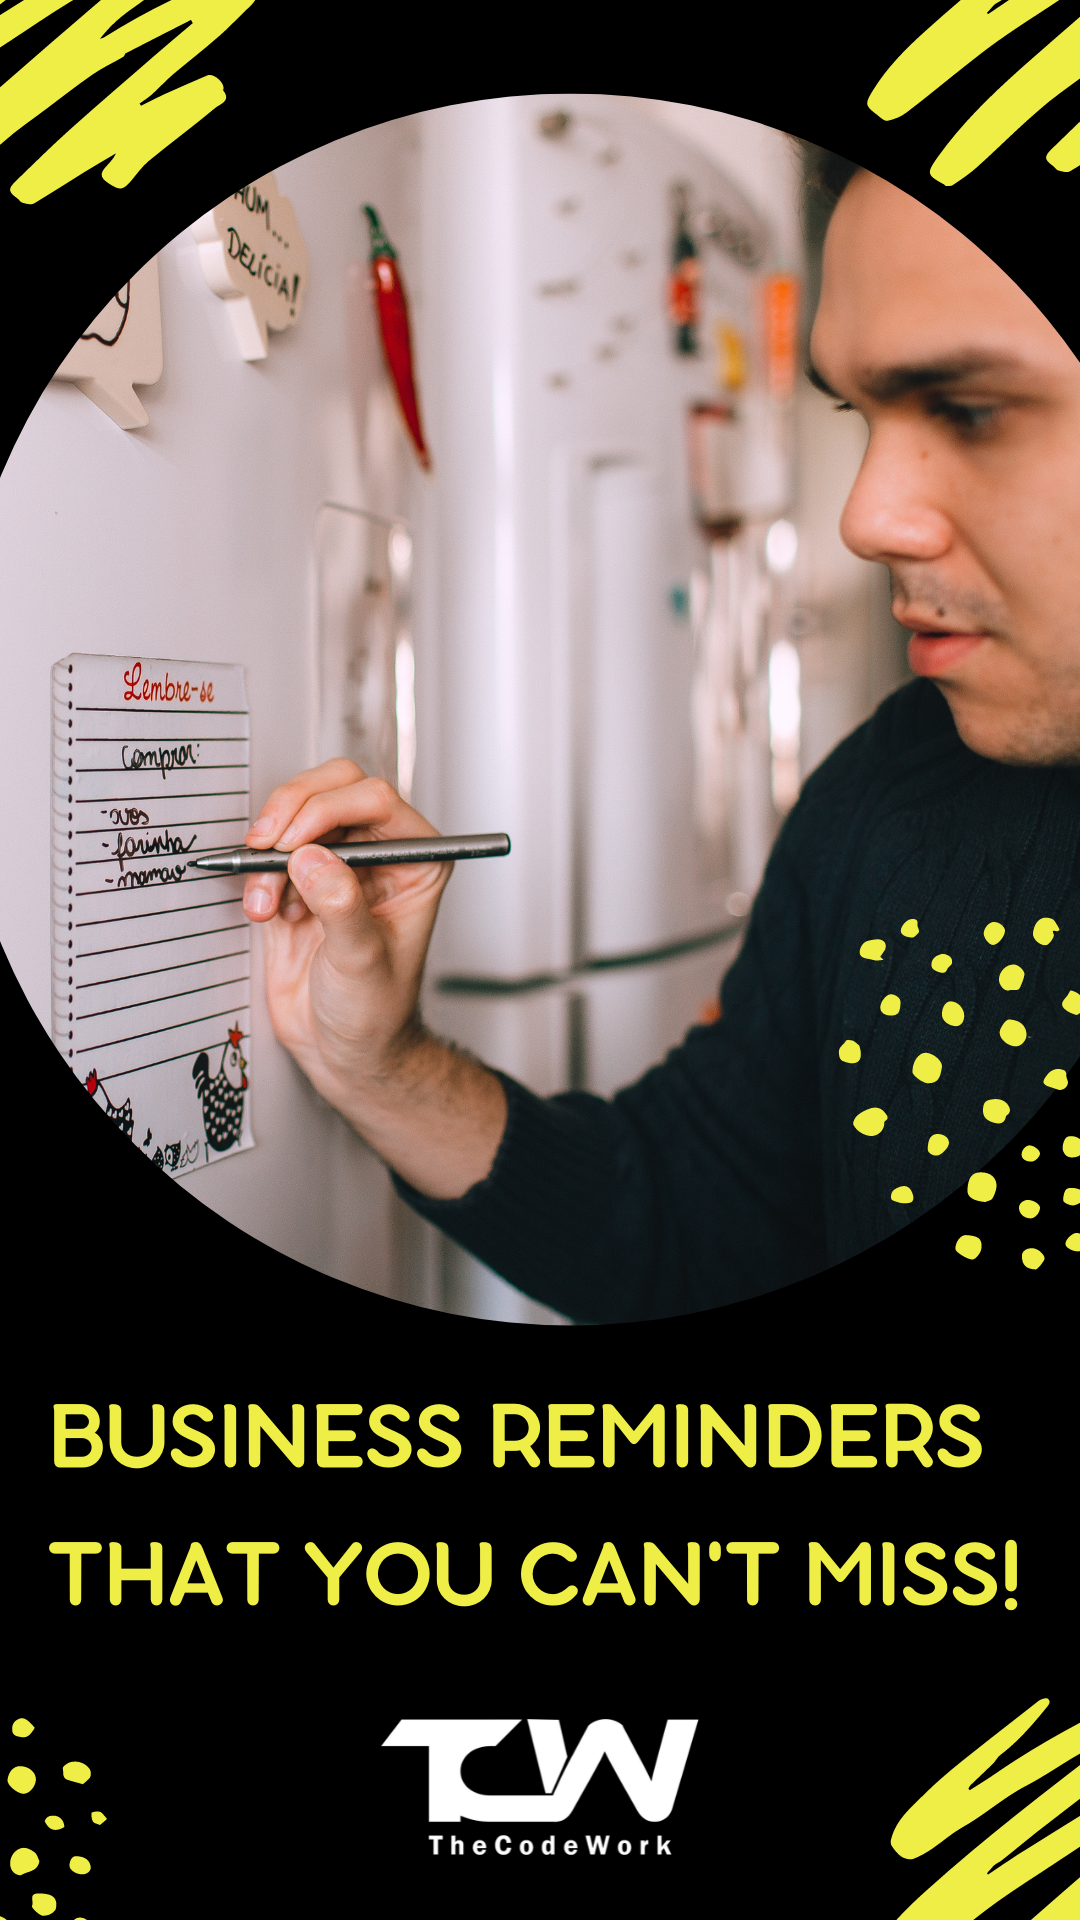 Business reminders that you can’t miss! 